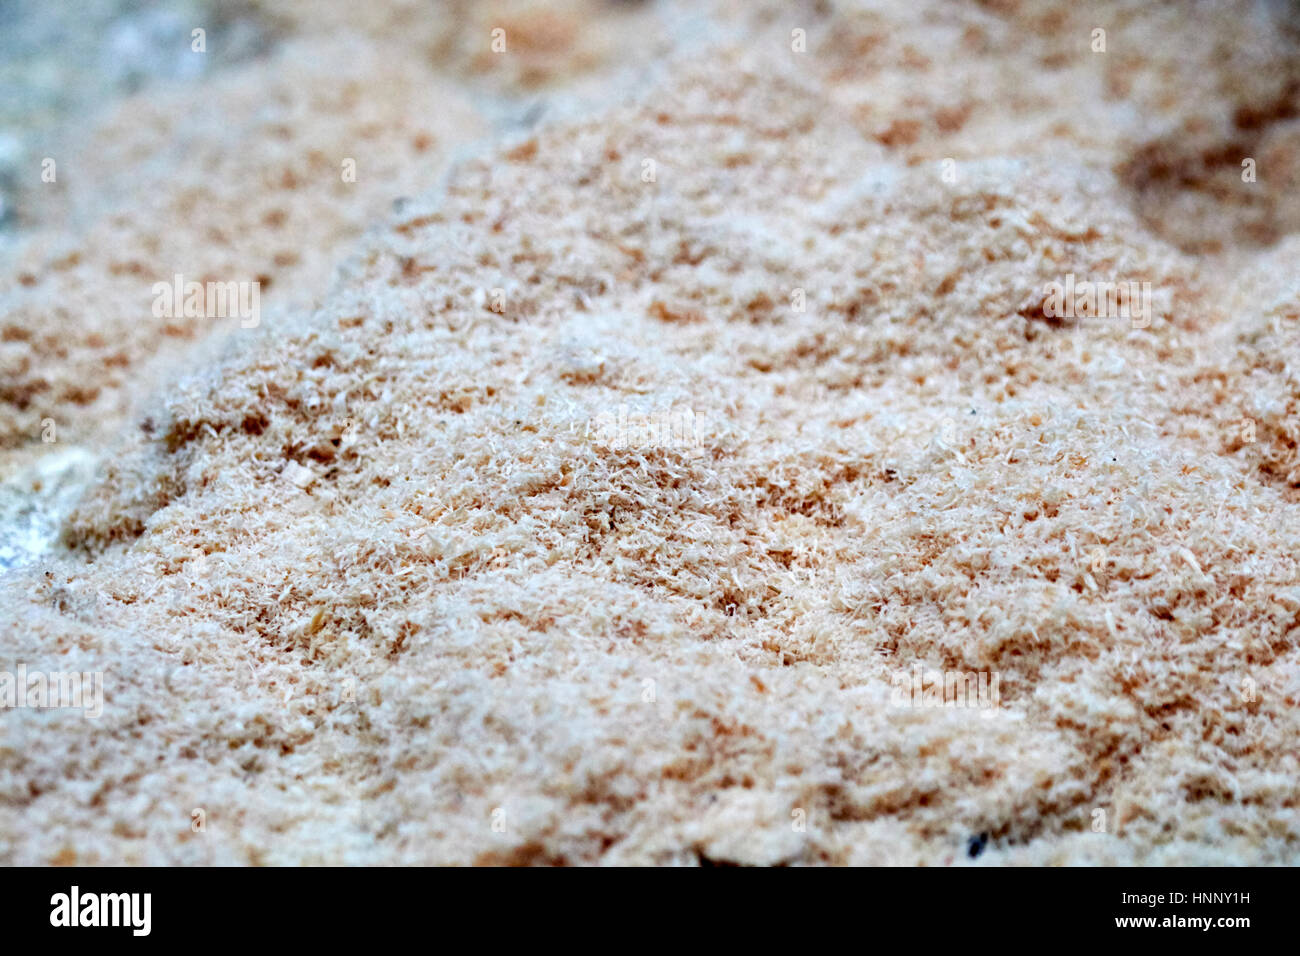 pile of sawdust Stock Photo